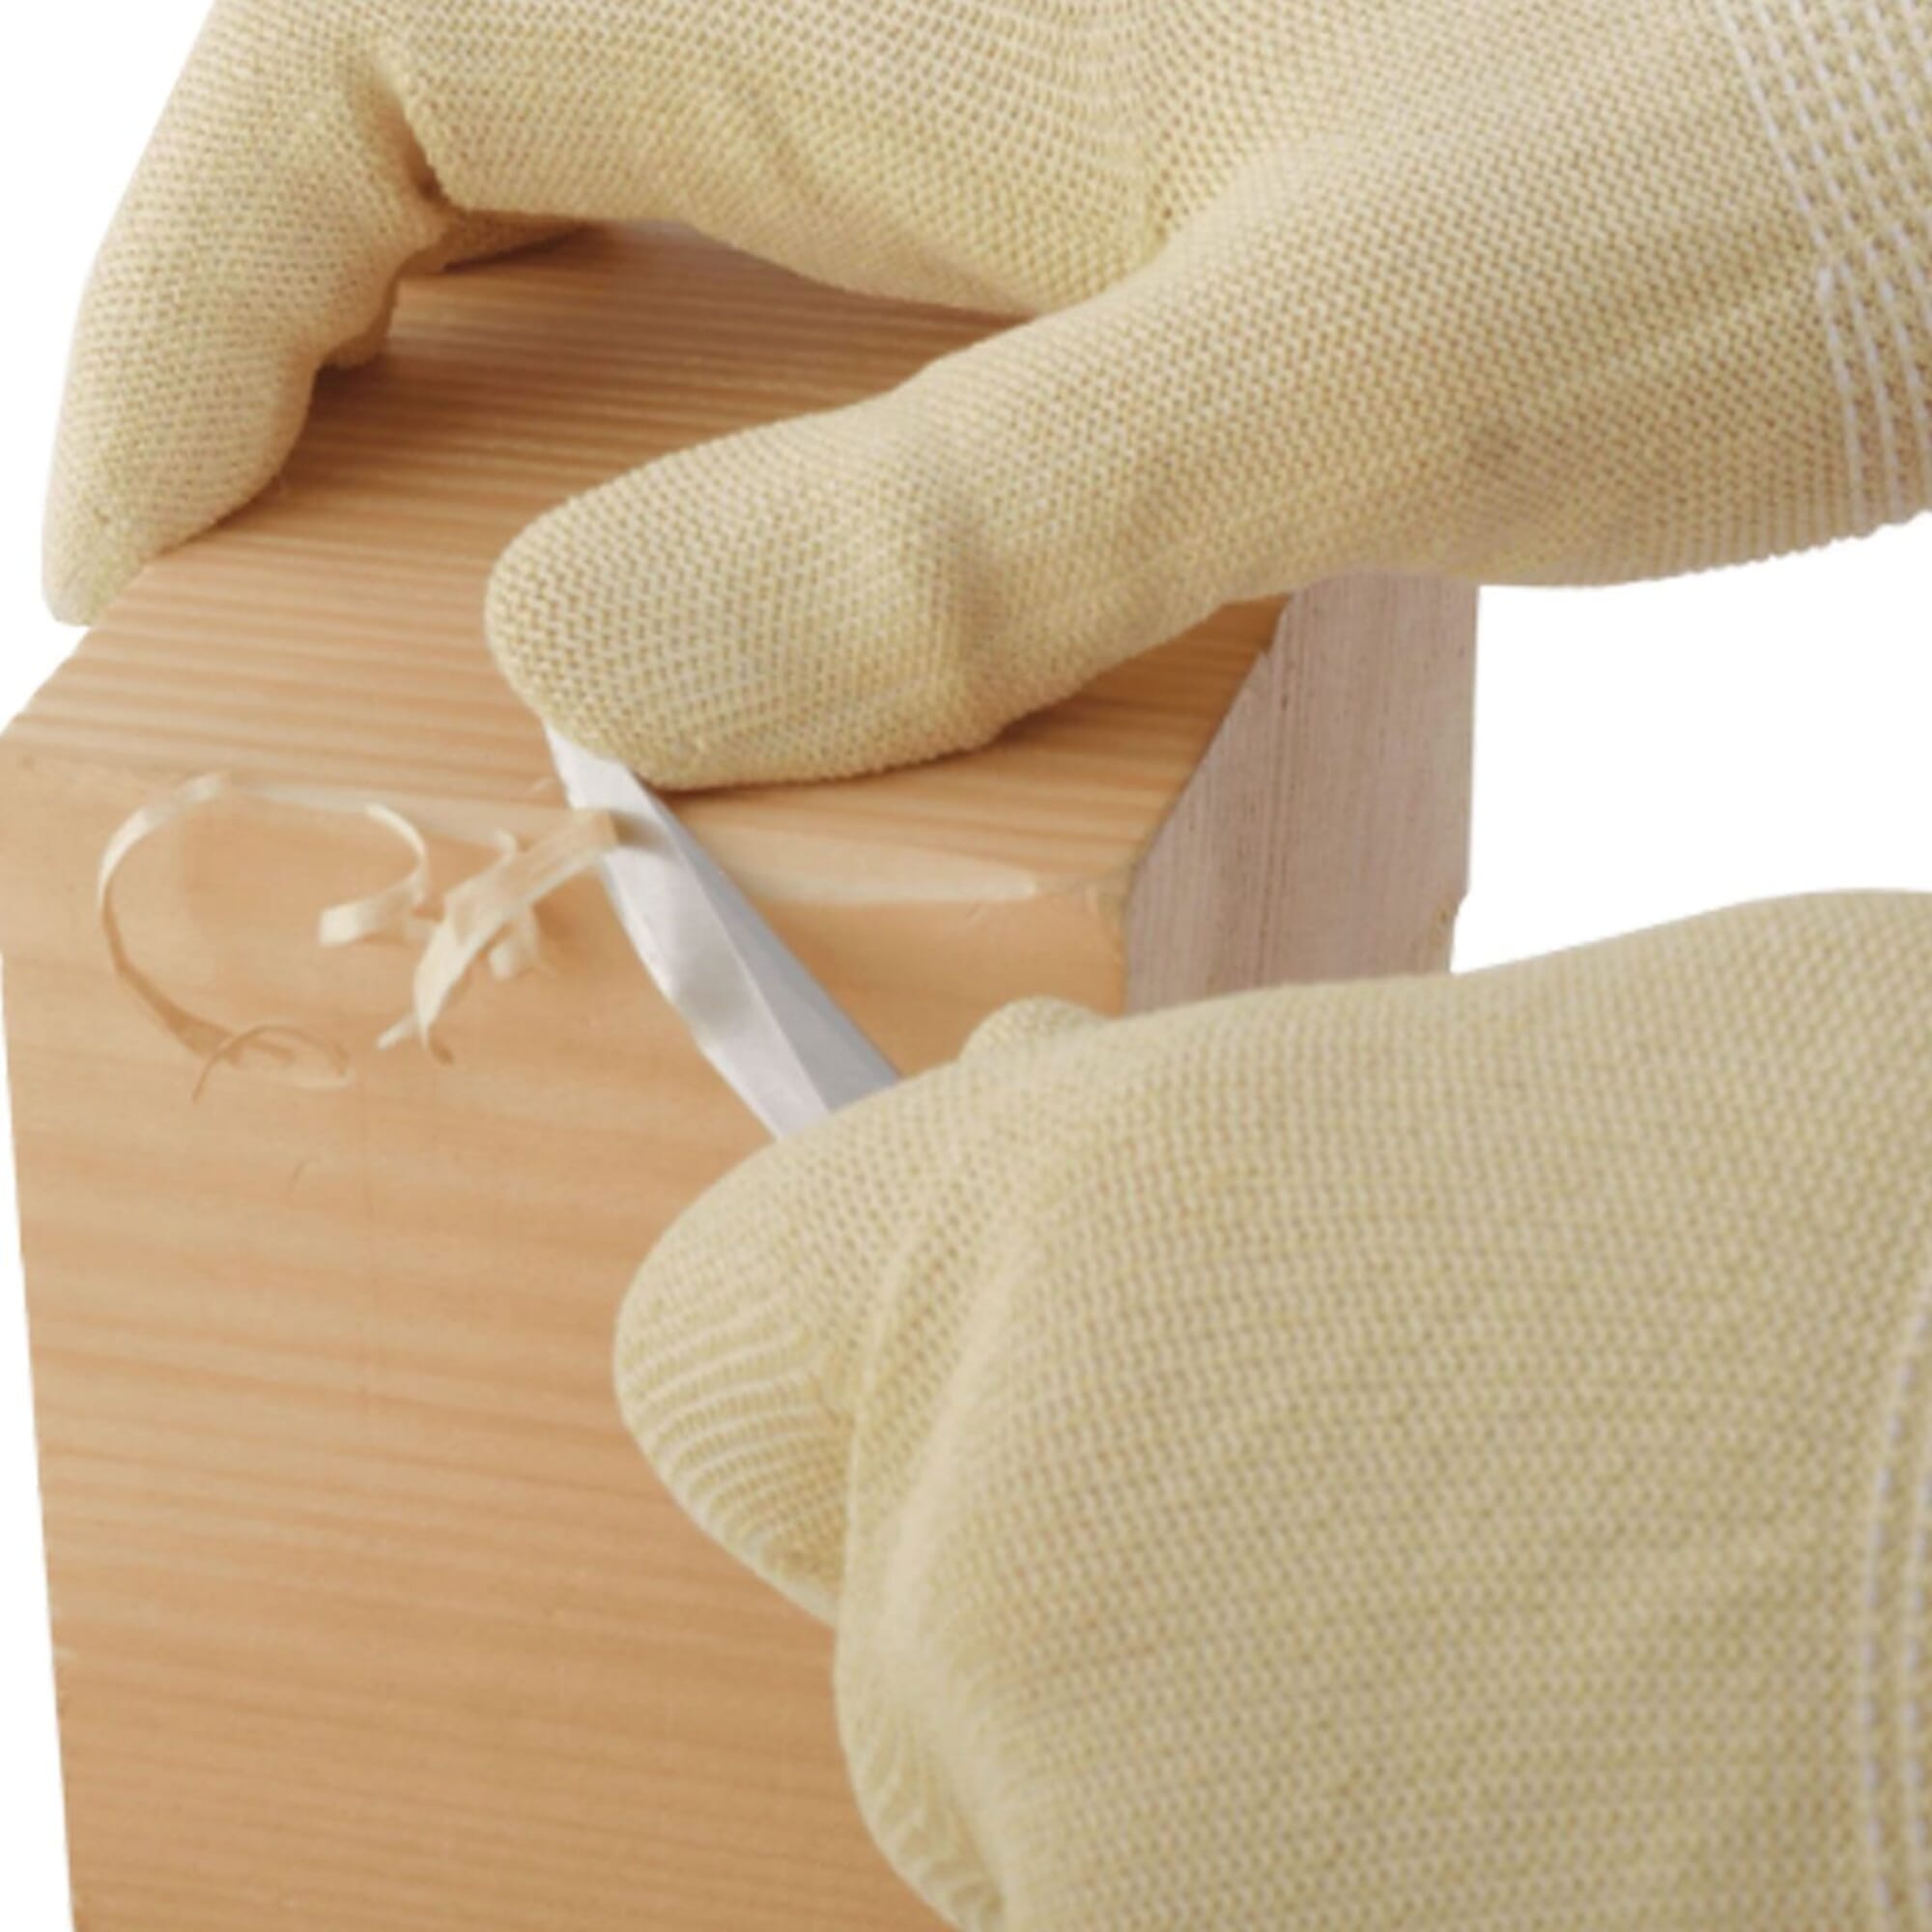 Cut Resistant Level 5 Gloves Great for Wood Carving or Whittling. They Are  Included in My Large Kit. 